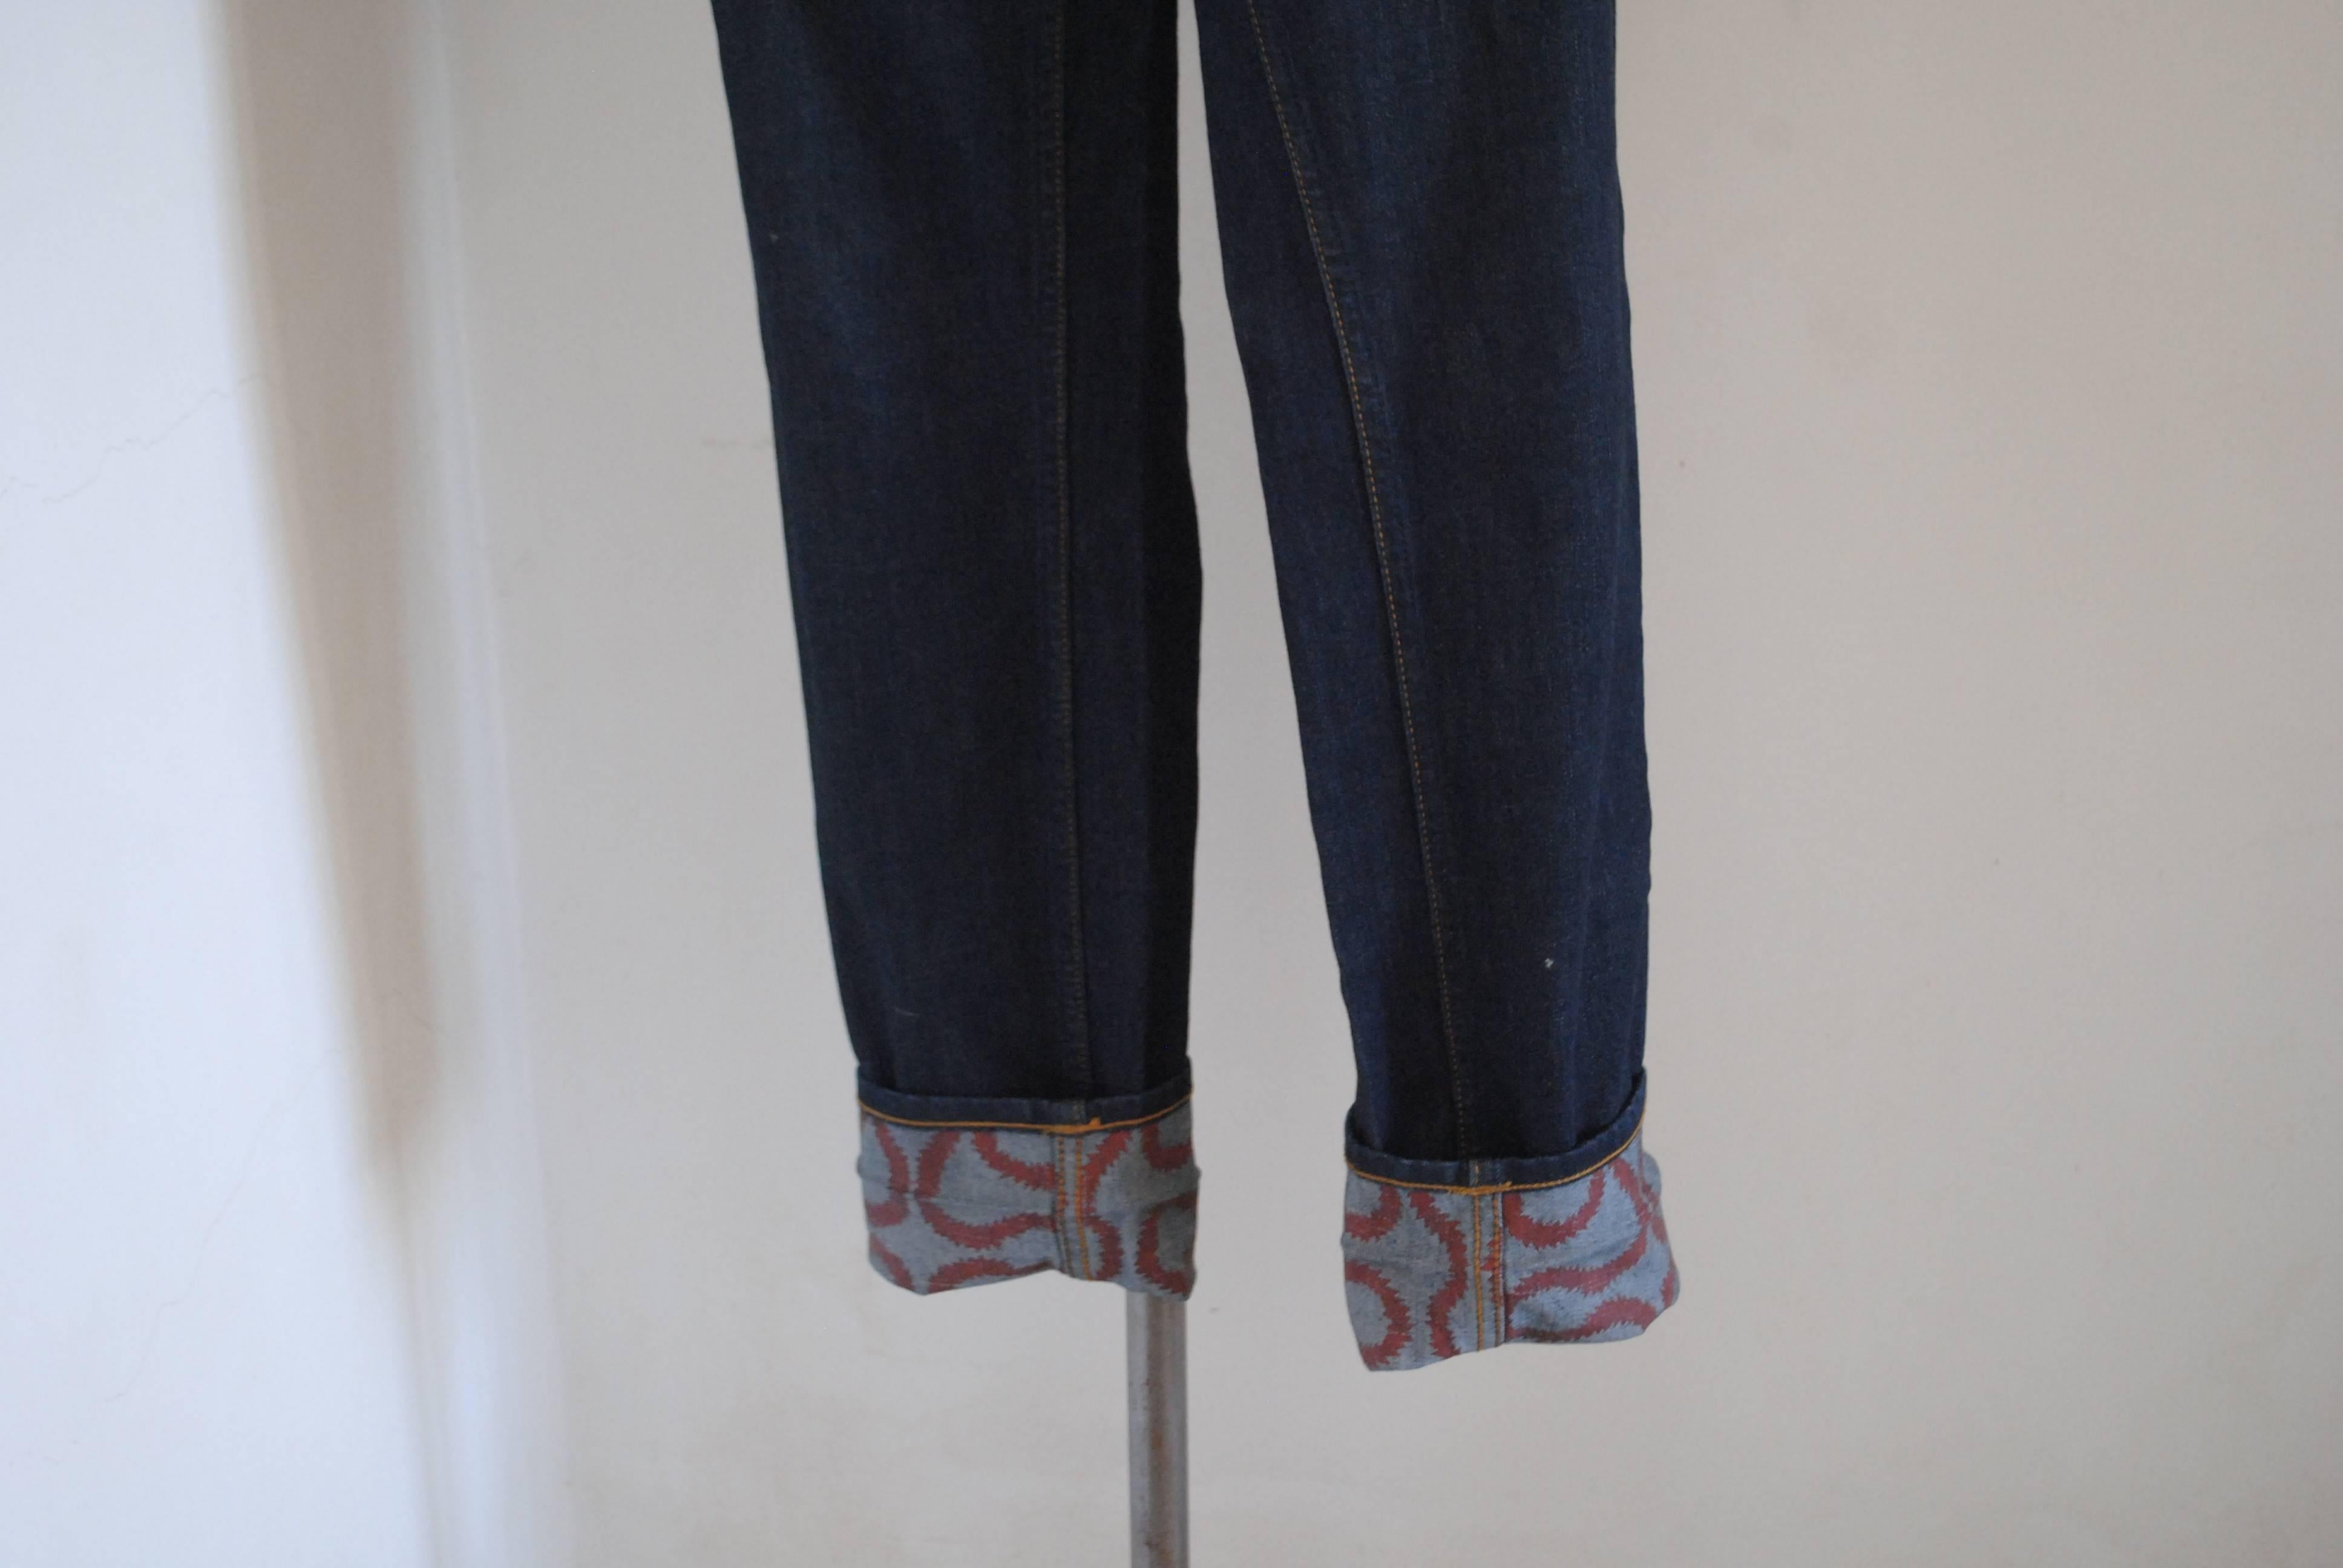 Vivienne Westwood anglomania LEE Denim Jeans
Totally made in italy in size 30
Composition: Cotton